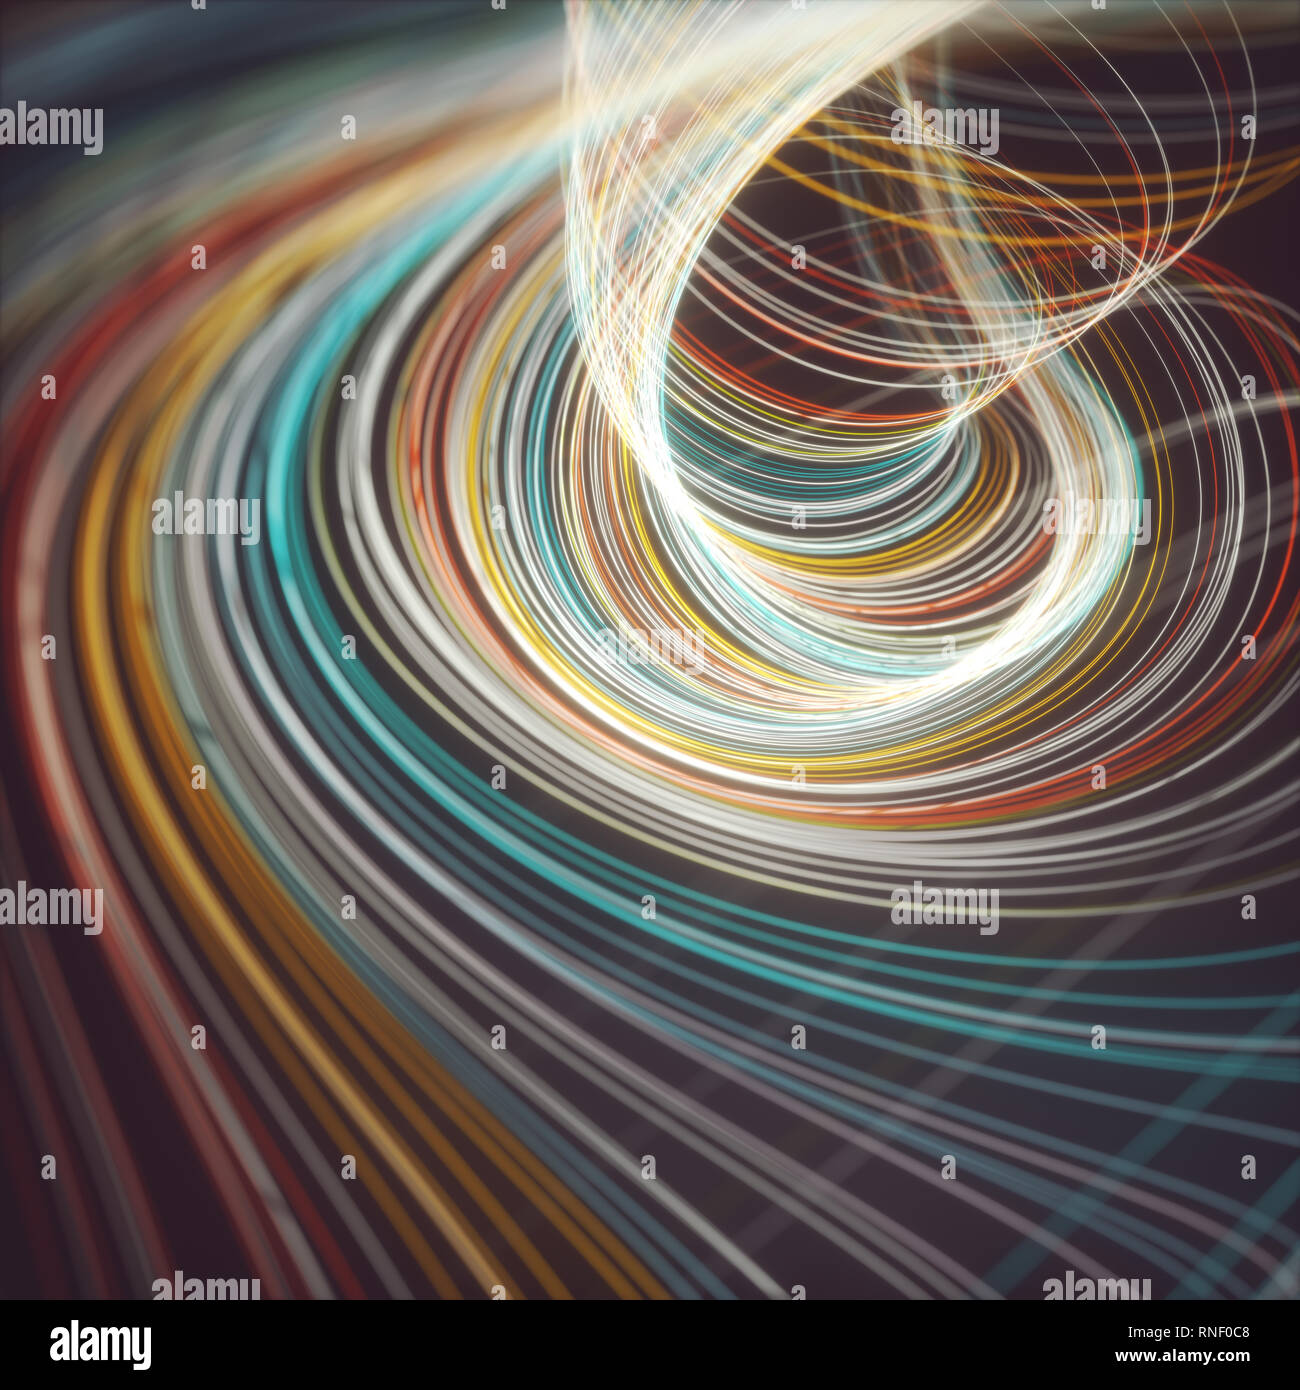 Abstract image of colored lines in circular motion as a tornado. 3D illustration Colorful background. Stock Photo